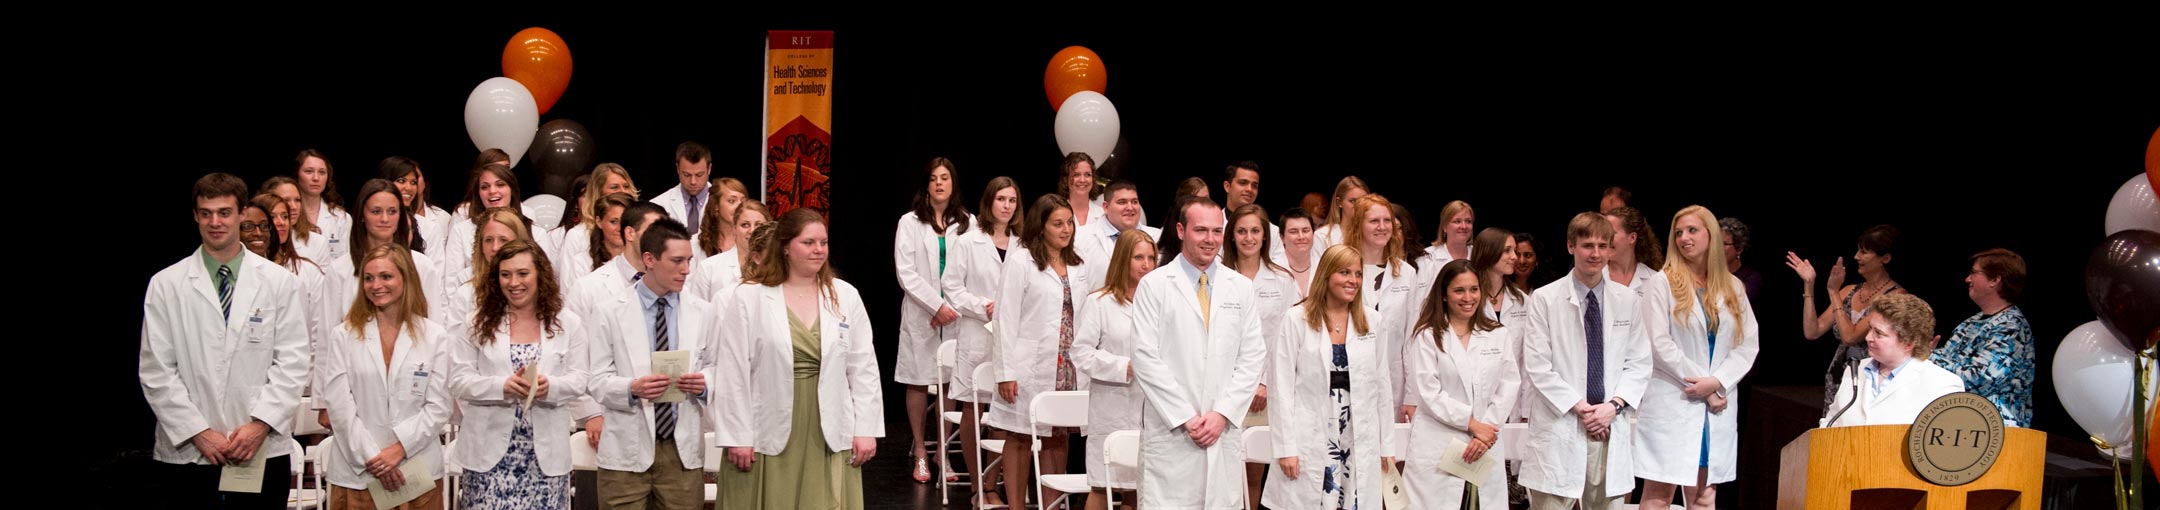 A class in white coats standing at a ceremony